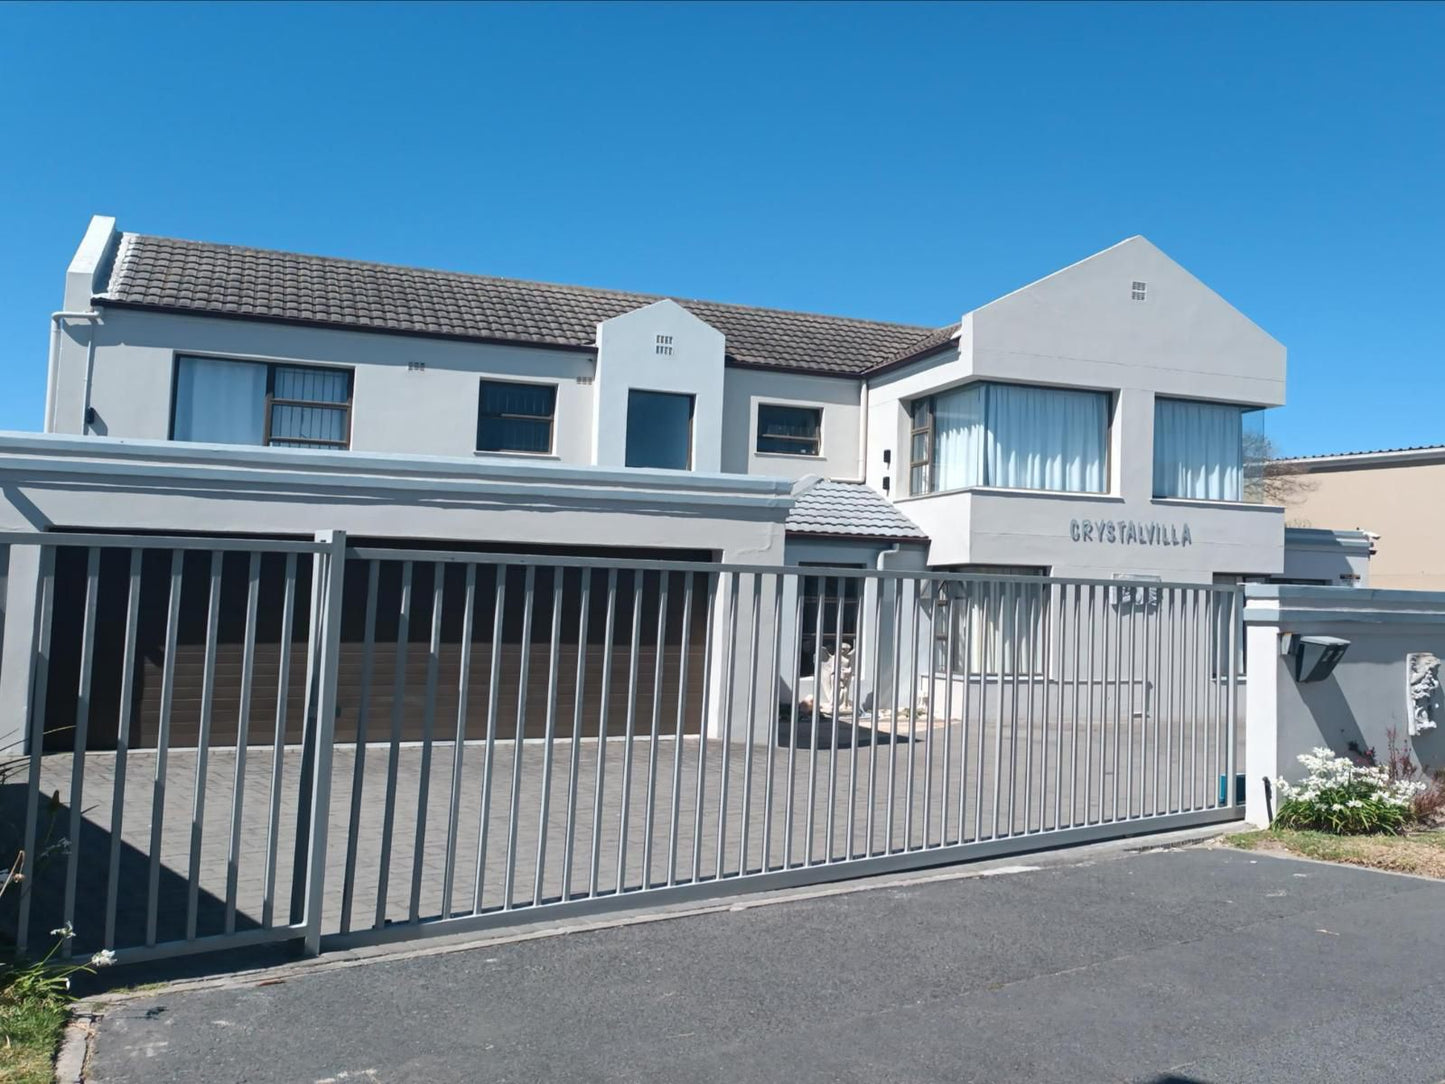 Crystalvilla Guest House West Beach Blouberg Western Cape South Africa House, Building, Architecture